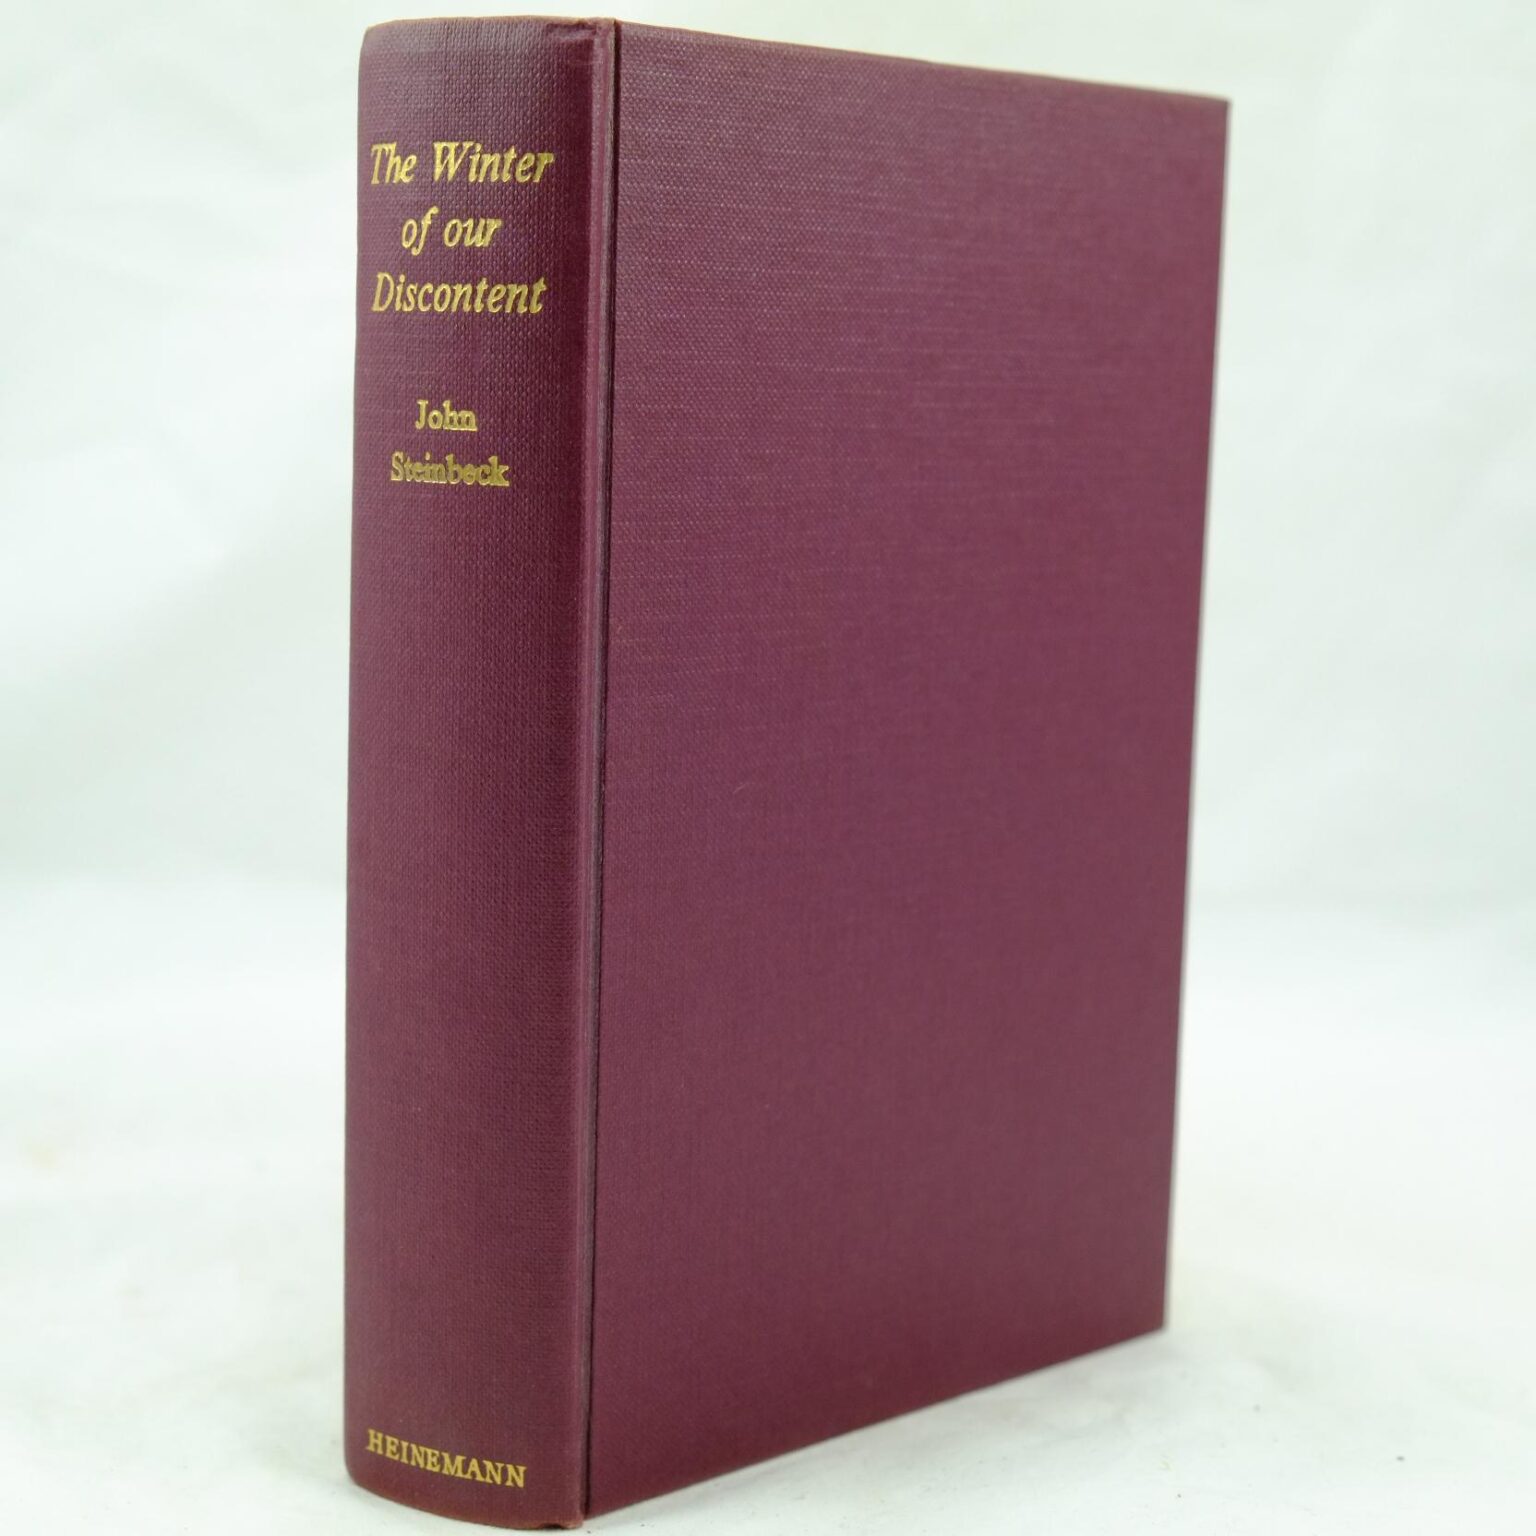 john steinbeck the winter of our discontent first edition